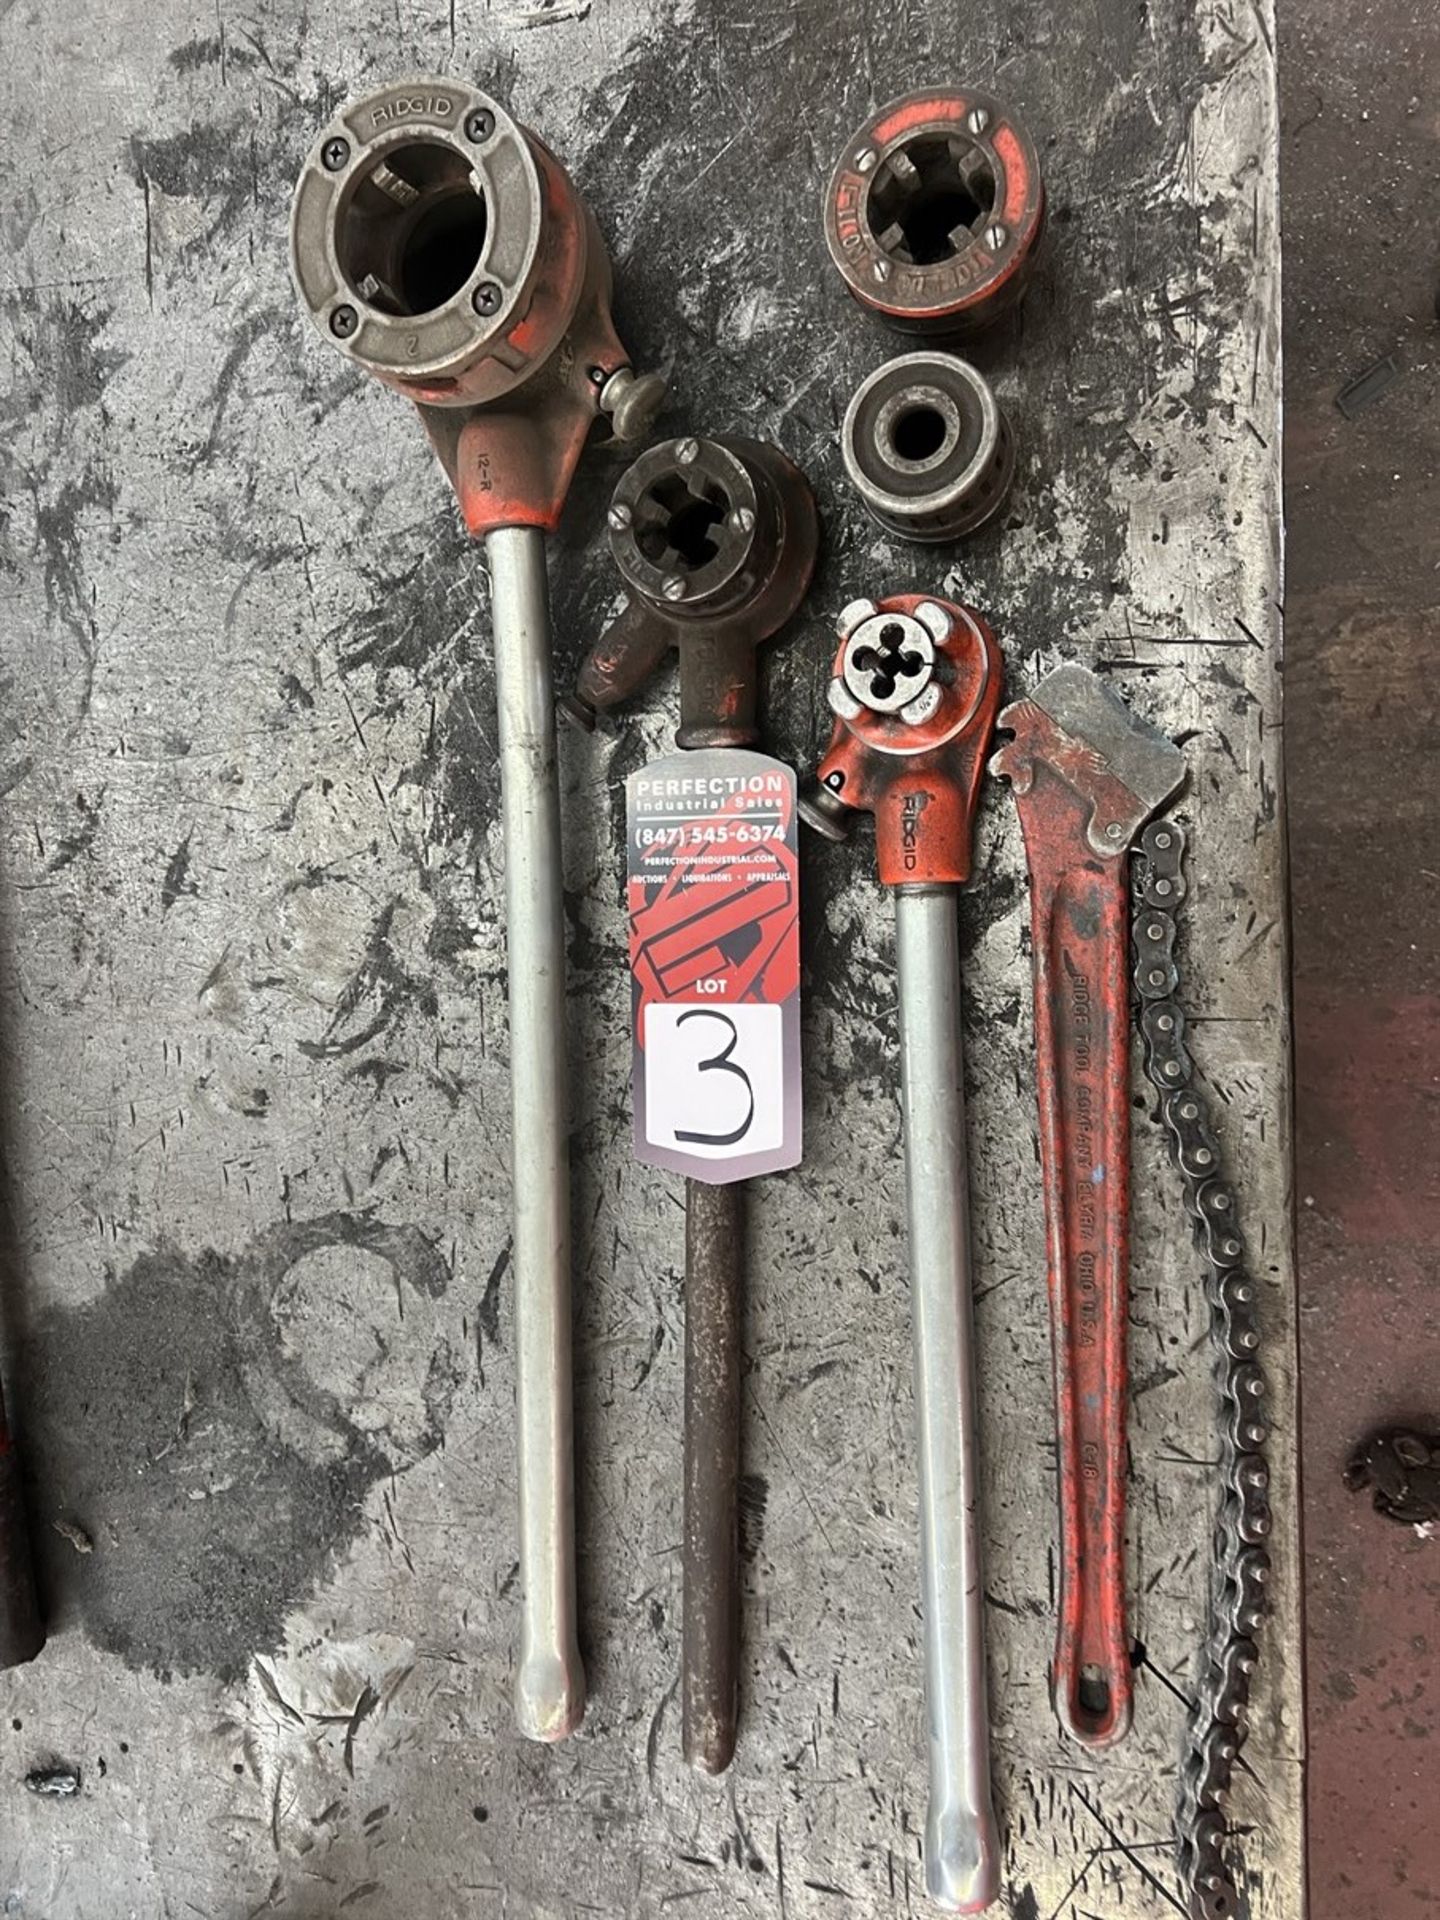 Lot of RIDGID Pipe Threader Dies and Handles w/ Chain Wrench, (Fab Shop) - Image 2 of 2